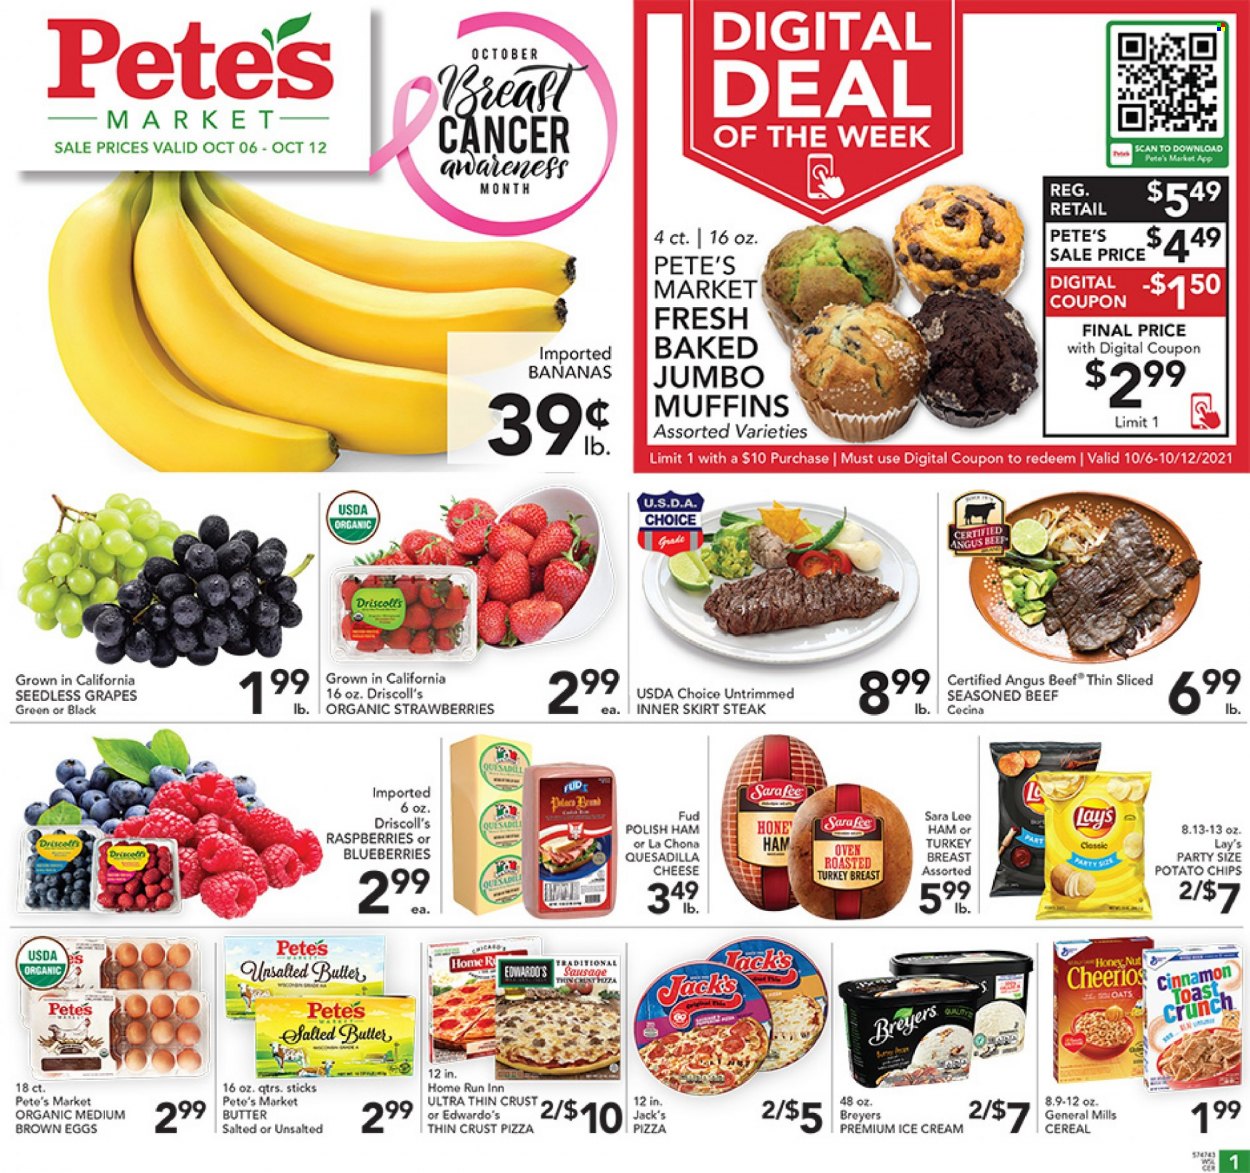 thumbnail - Pete's Fresh Market Flyer - 10/06/2021 - 10/12/2021 - Sales products - seedless grapes, Sara Lee, muffin, blueberries, grapes, pizza, ham, sausage, eggs, ice cream, potato chips, chips, Lay’s, oats, cereals, Cheerios, cinnamon, beef meat, steak. Page 1.